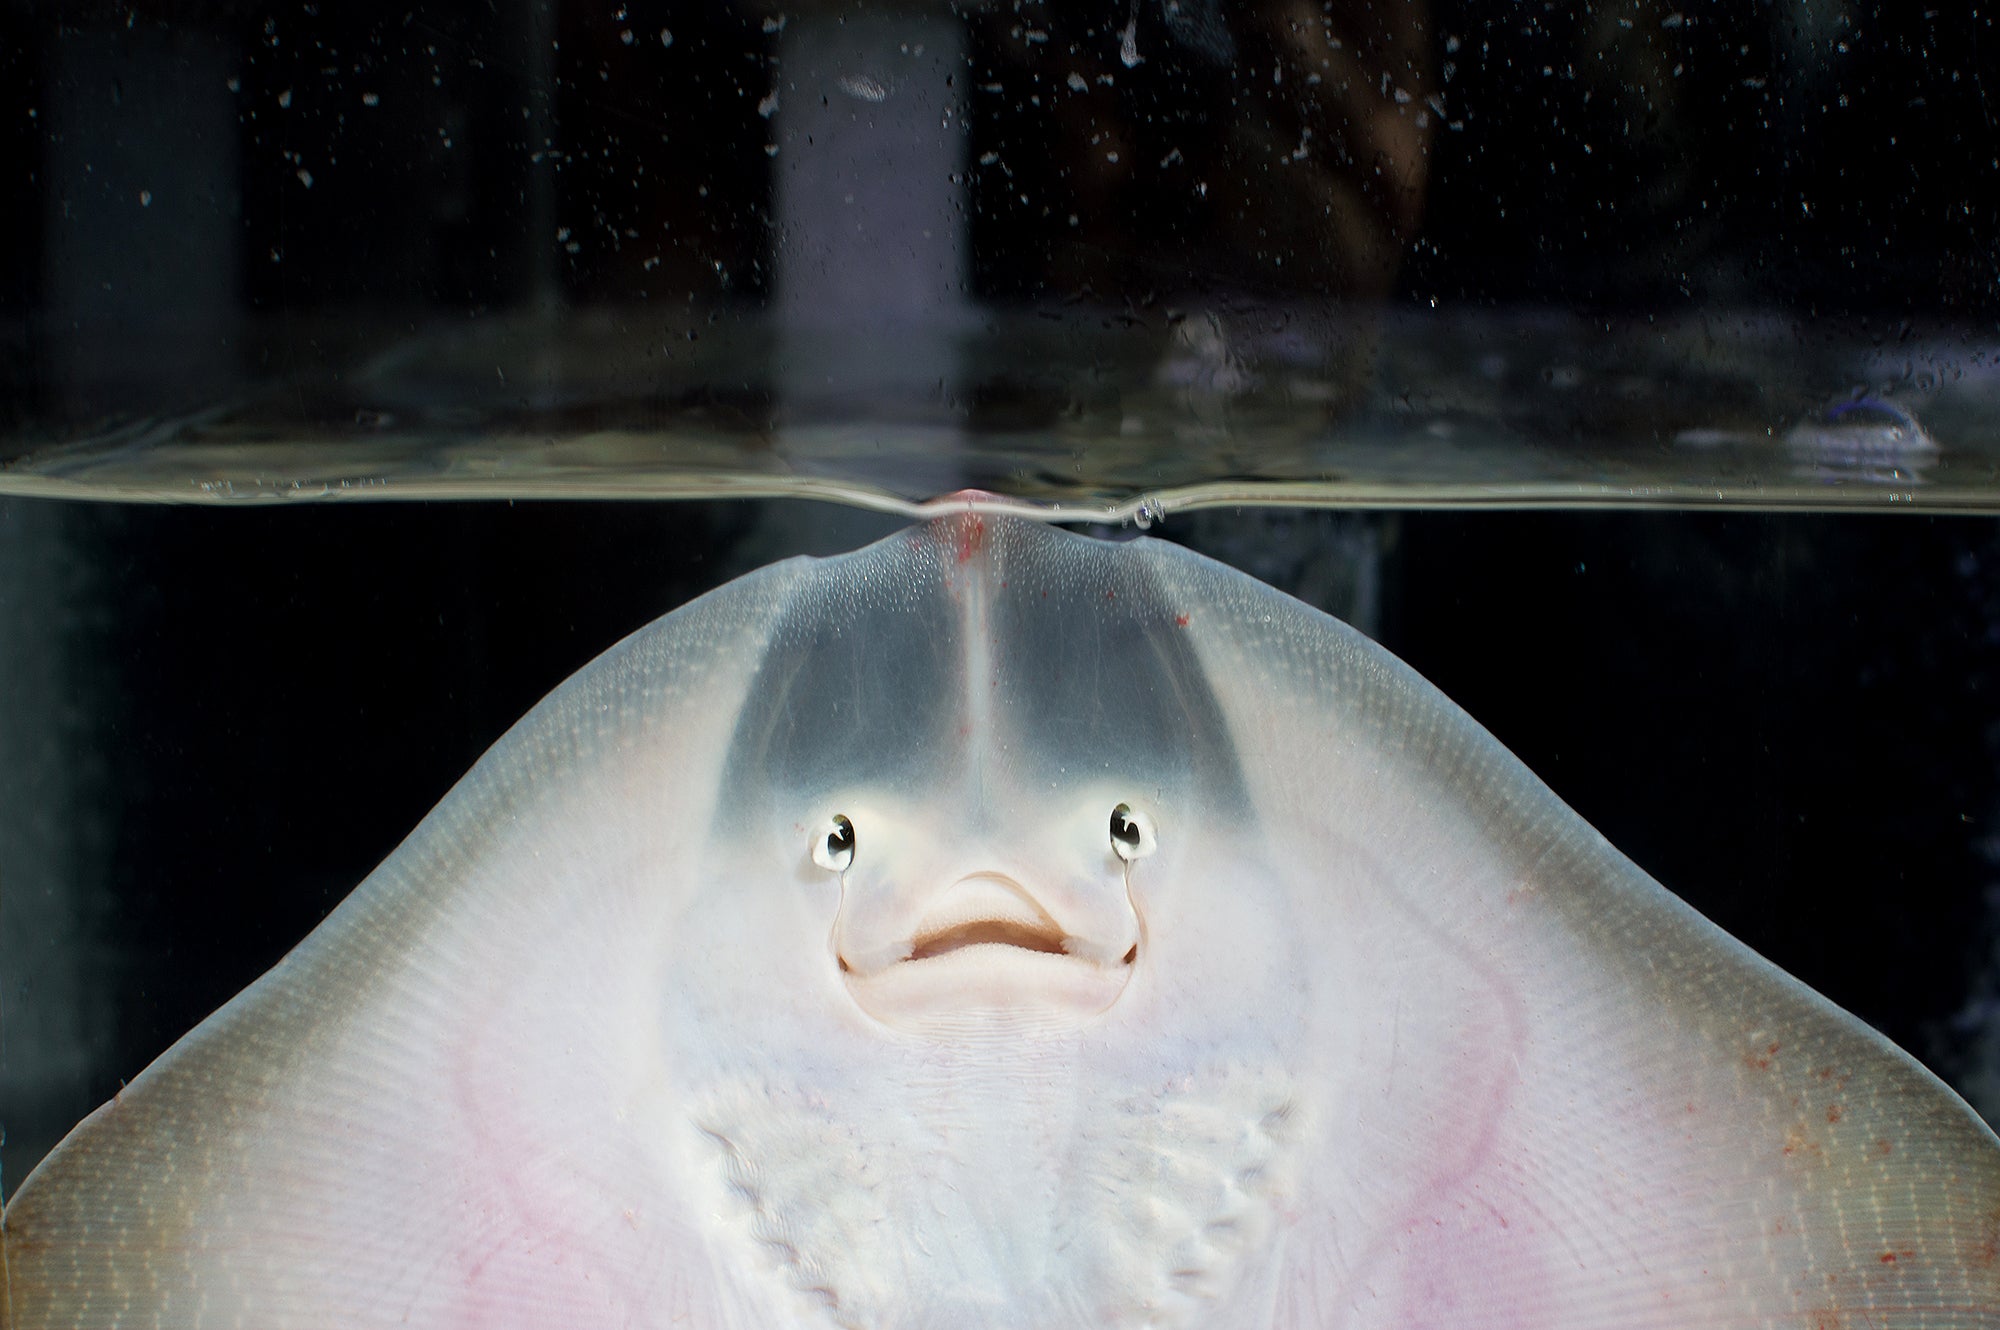 How Did an Aquarium Stingray Get Pregnant without a Mate